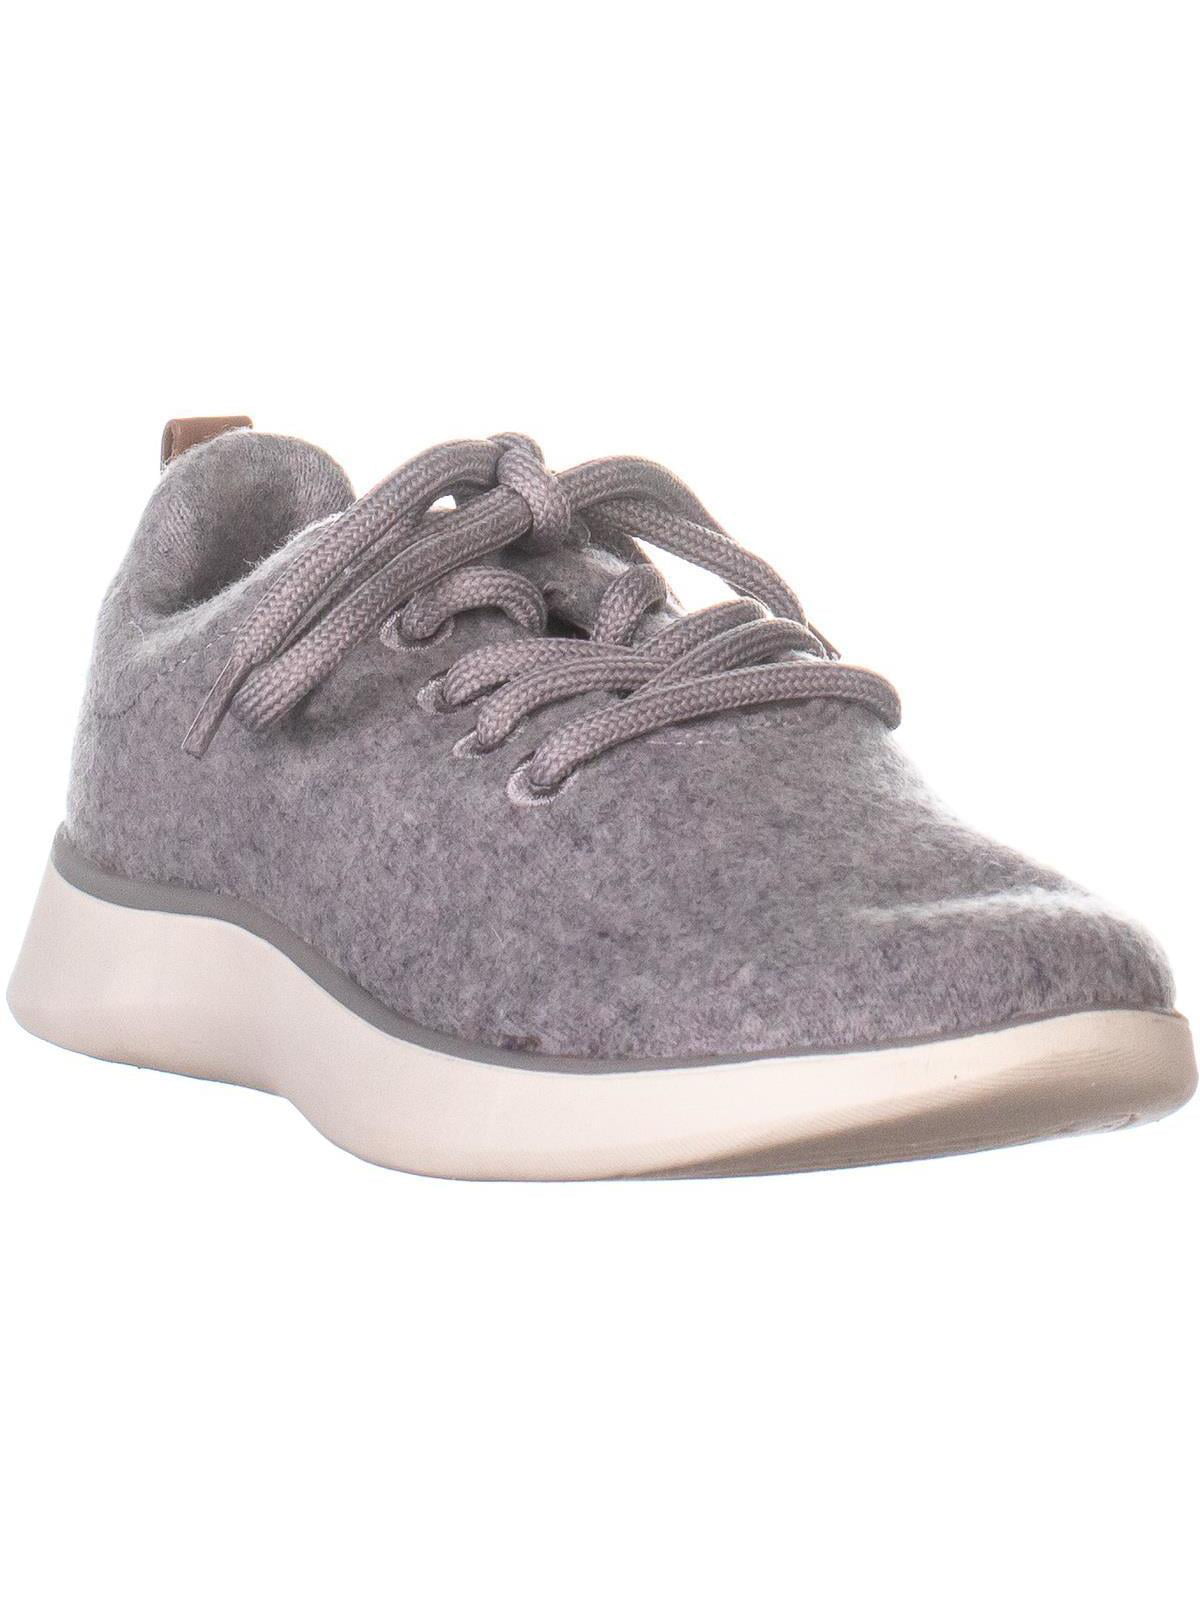 Womens Dr. Scholl's Freestep Lace Up Sneakers, Light Gray, 7.5 US / 37. ...